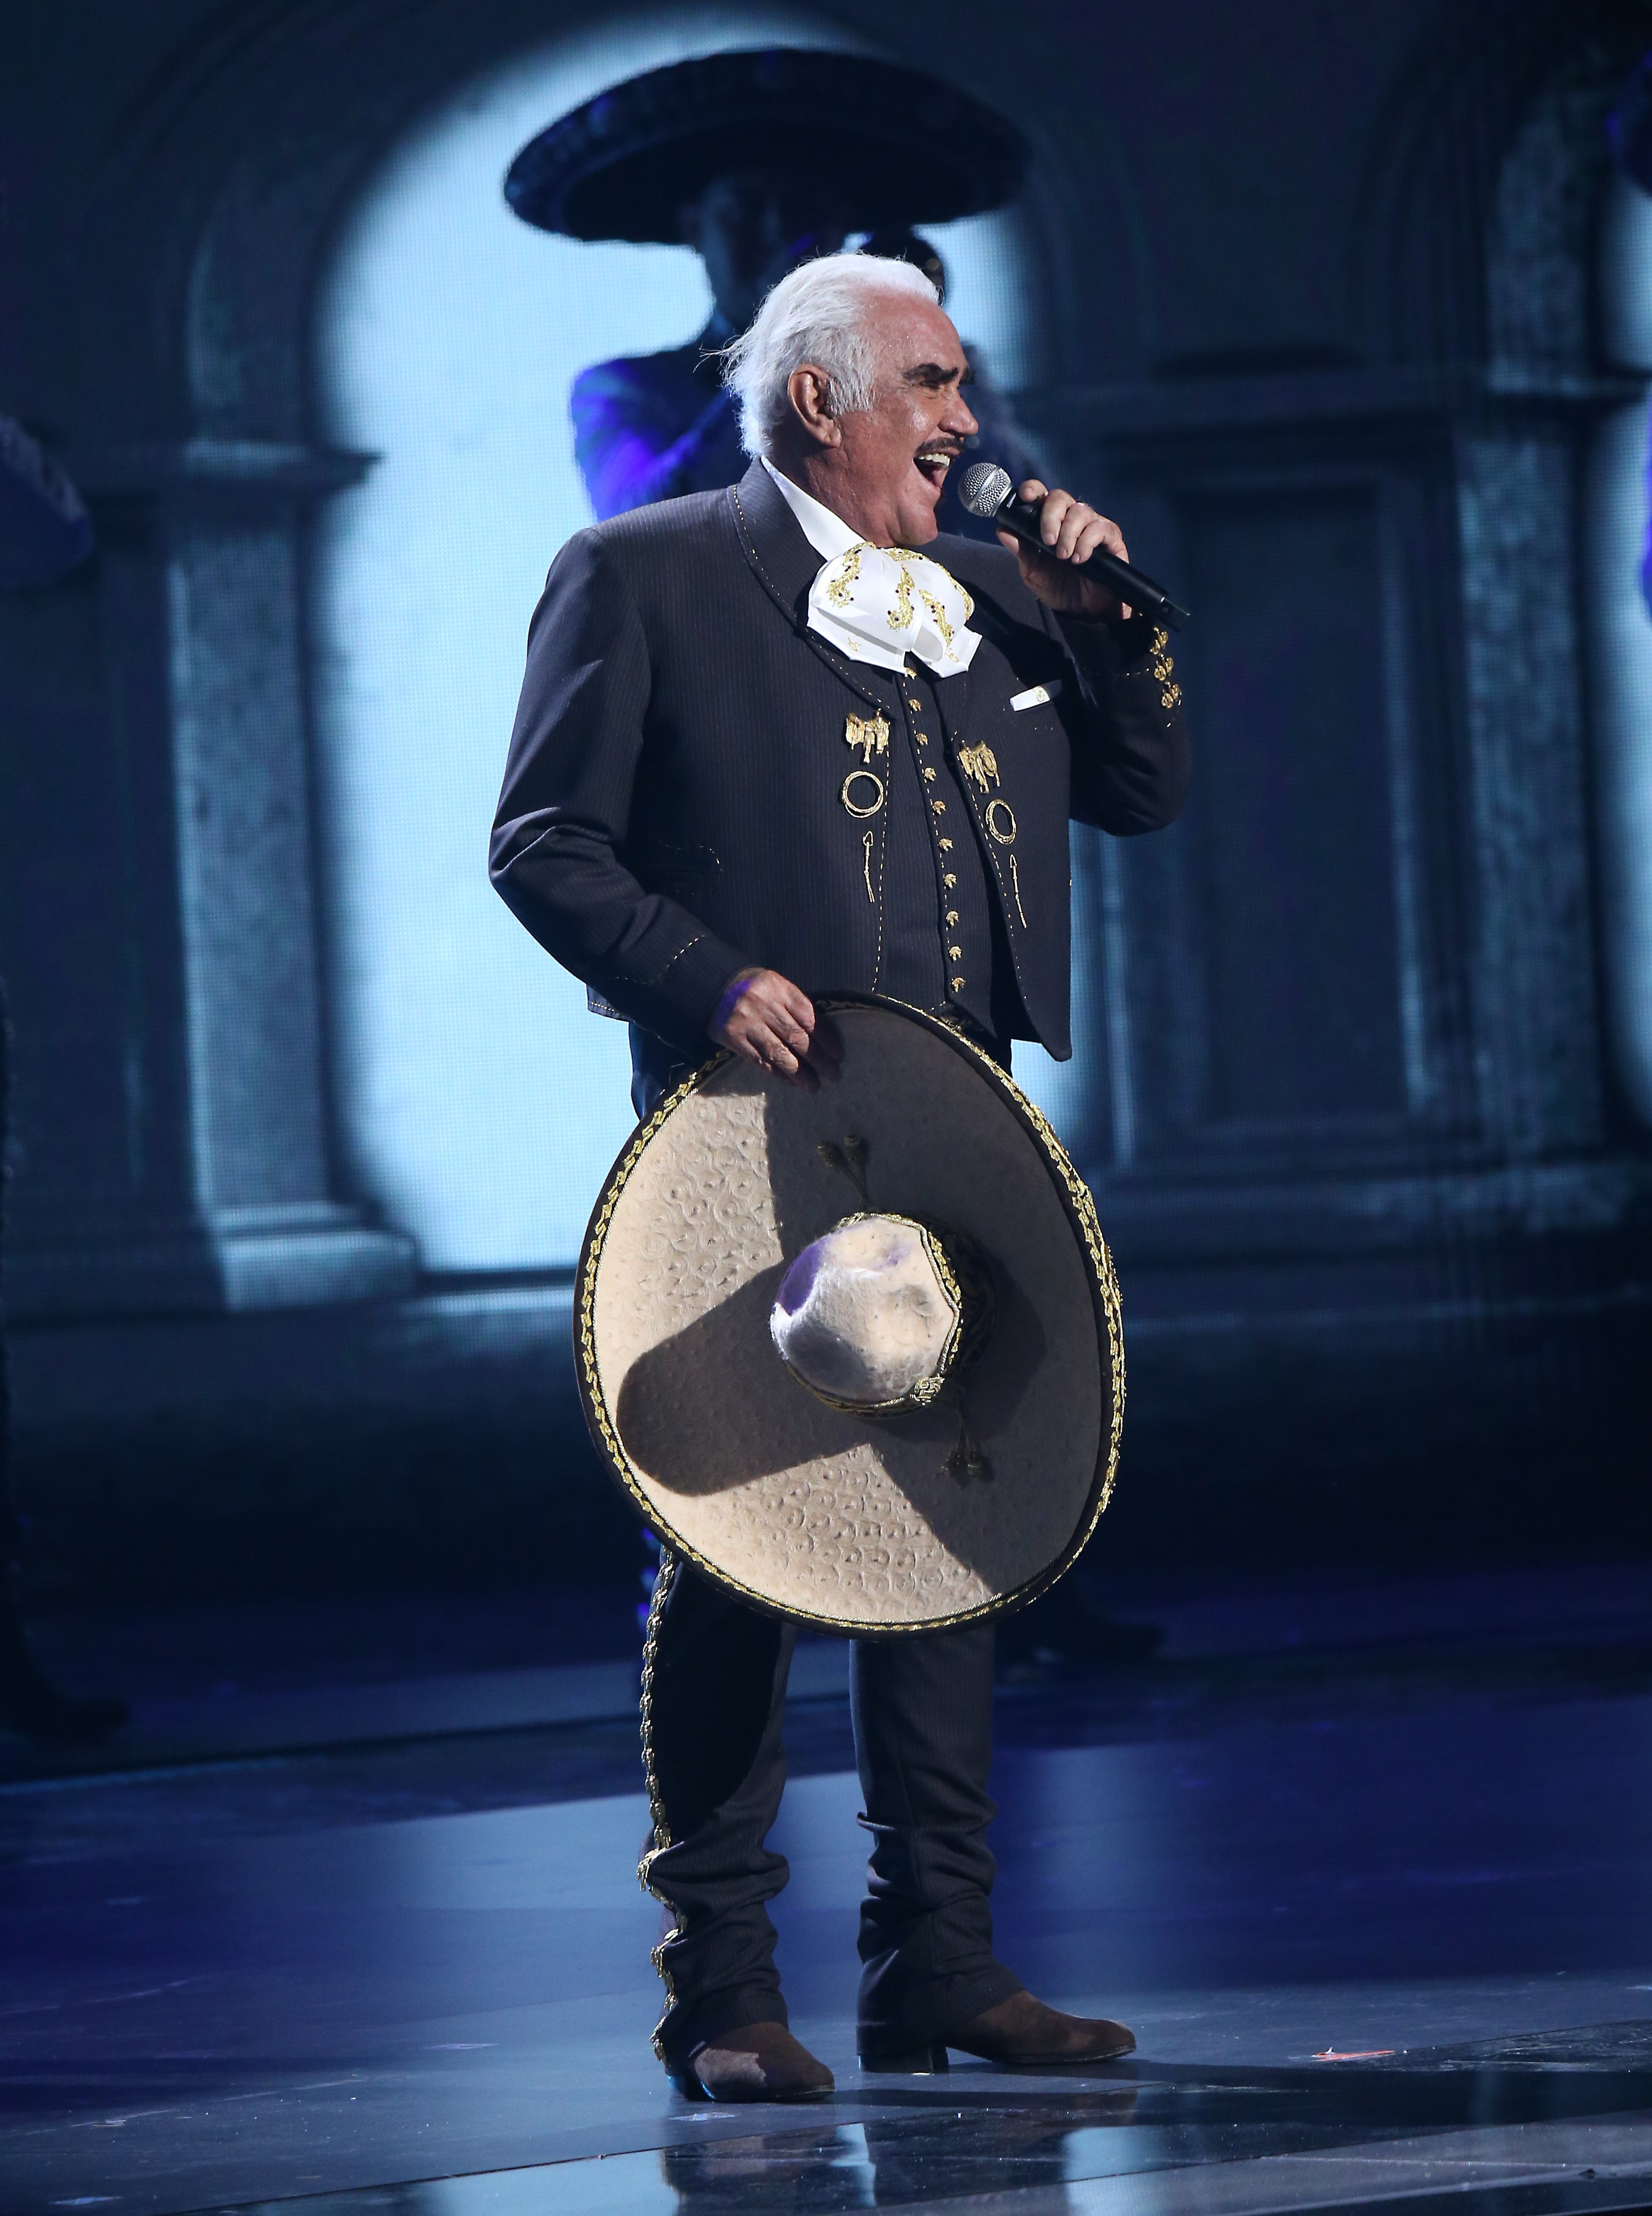 Vicente Fernández performs onstage during the 20th Annual Latin GRAMMY Awards held at MGM Grand Garden Arena on November 14, 2019 in Las Vegas, Nevada | Source: Getty Images